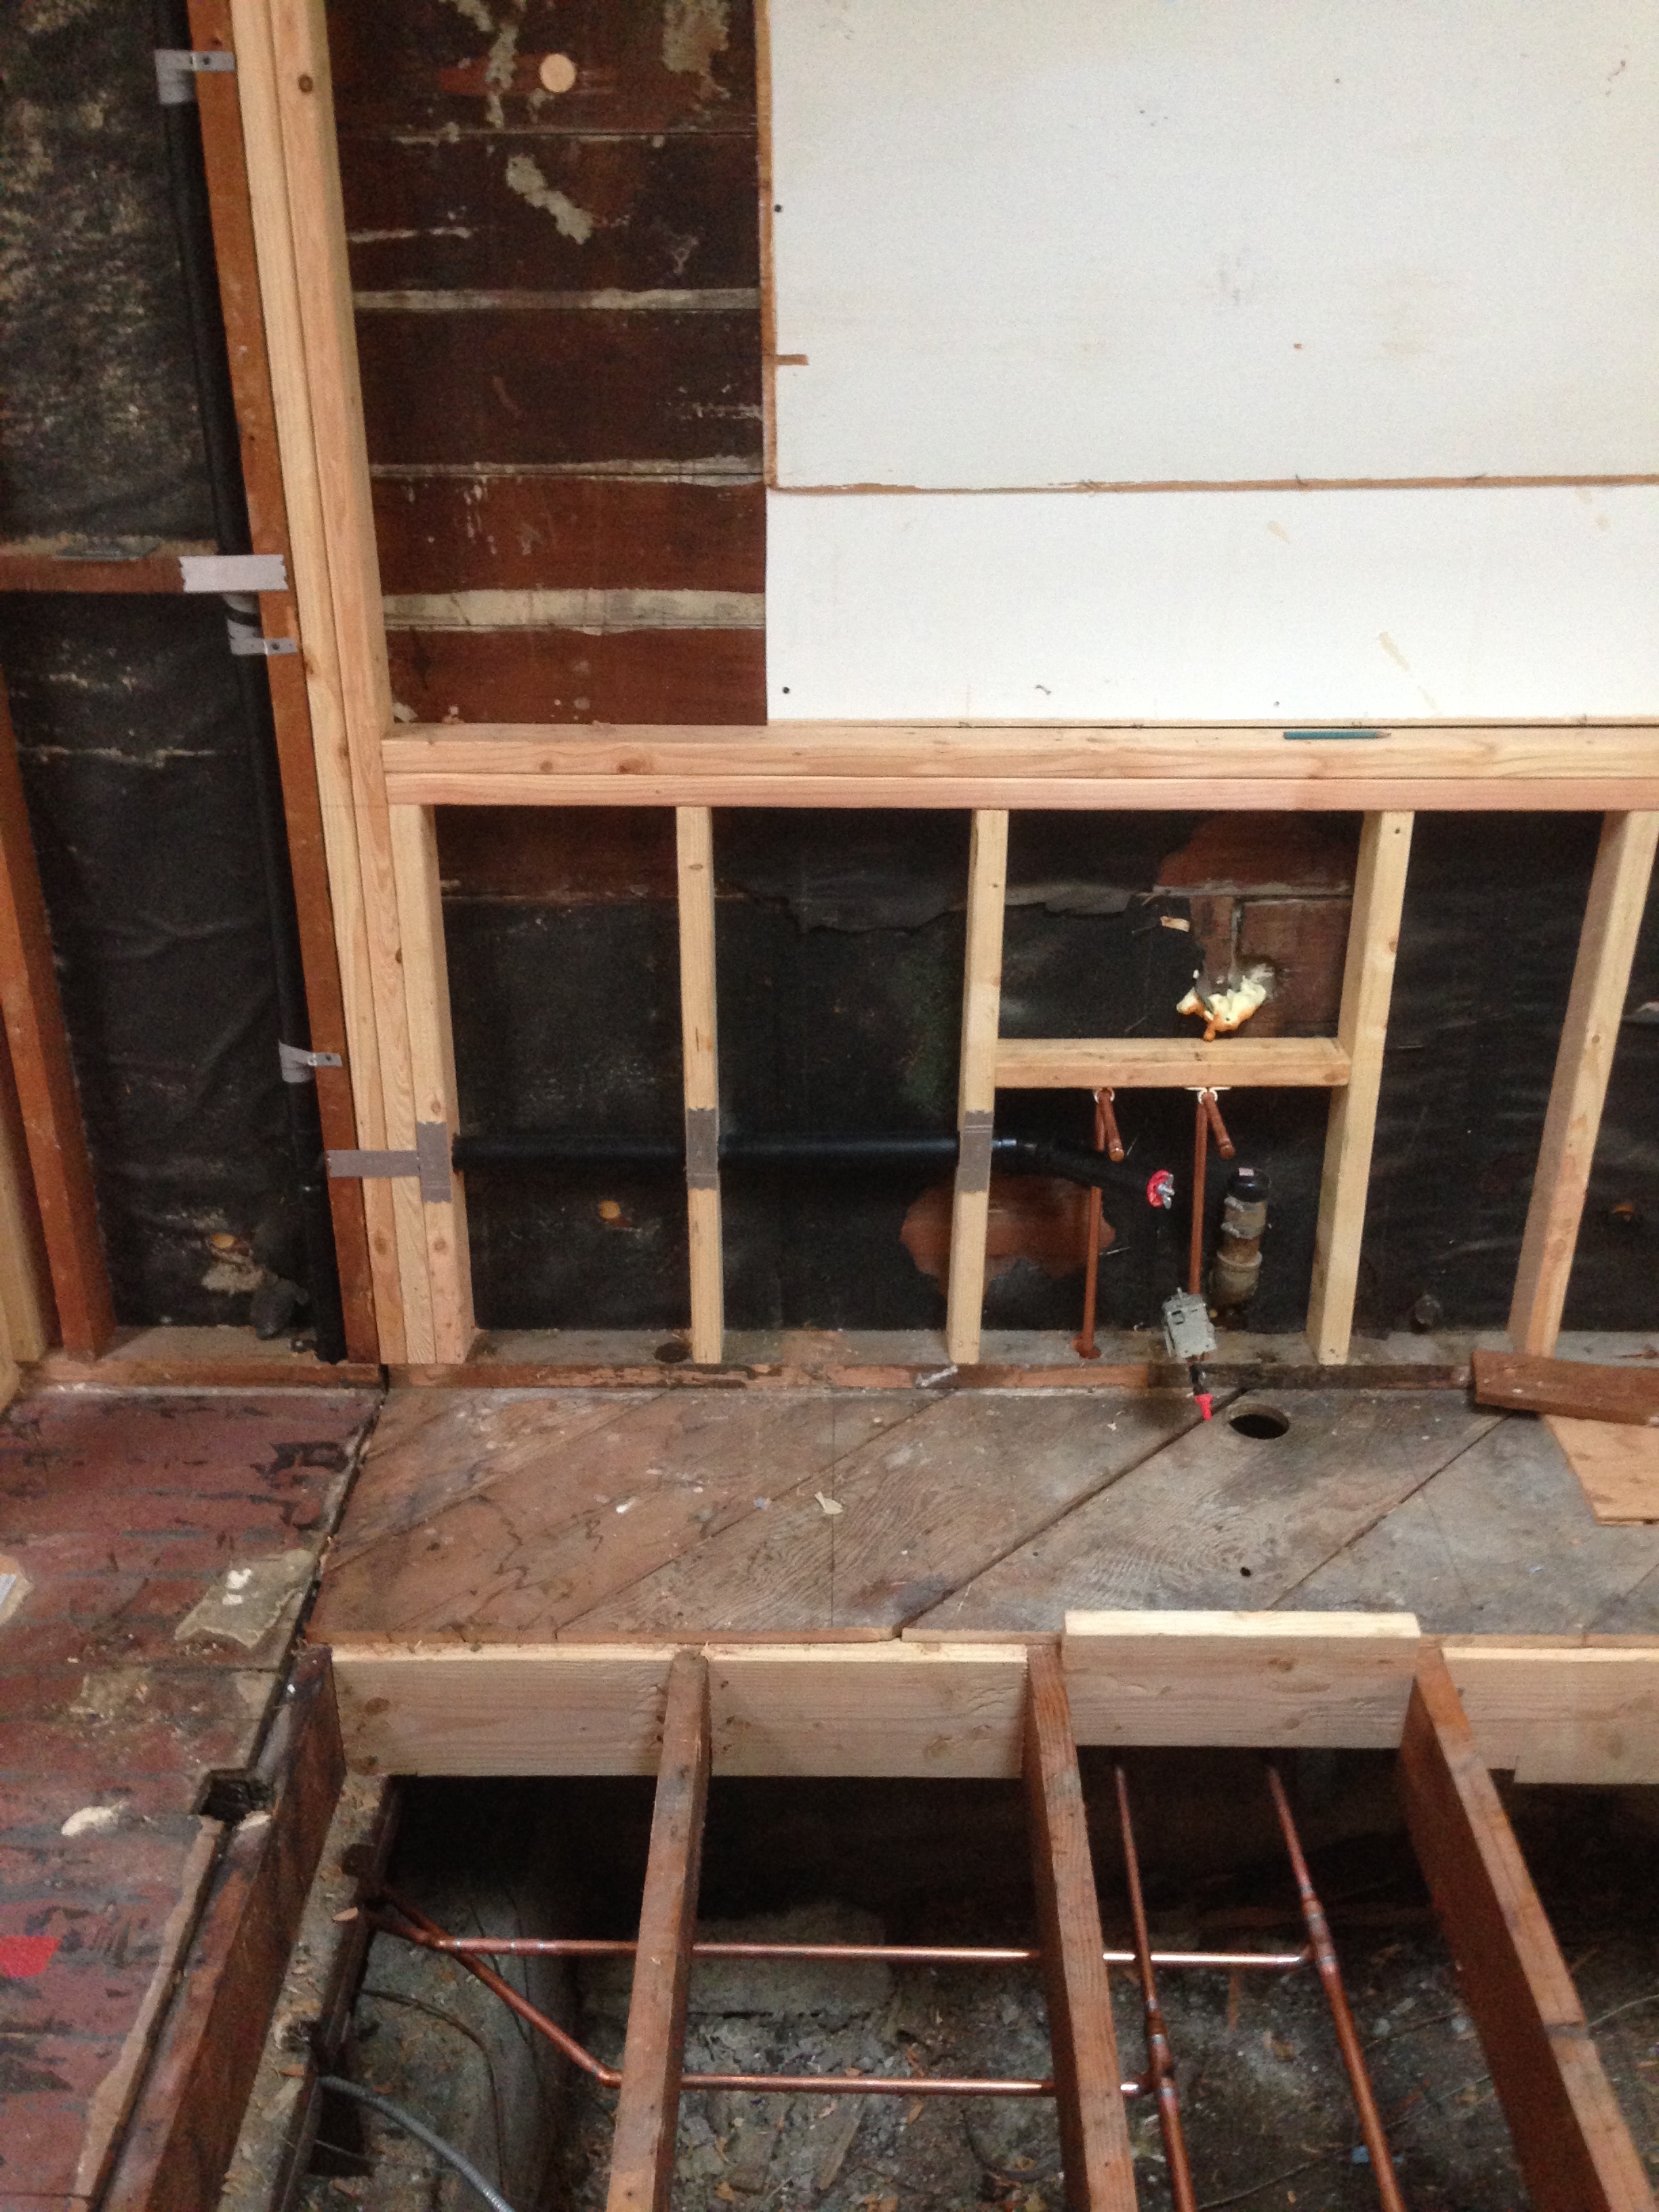 All new copper supply lines and drains for kitchen sink